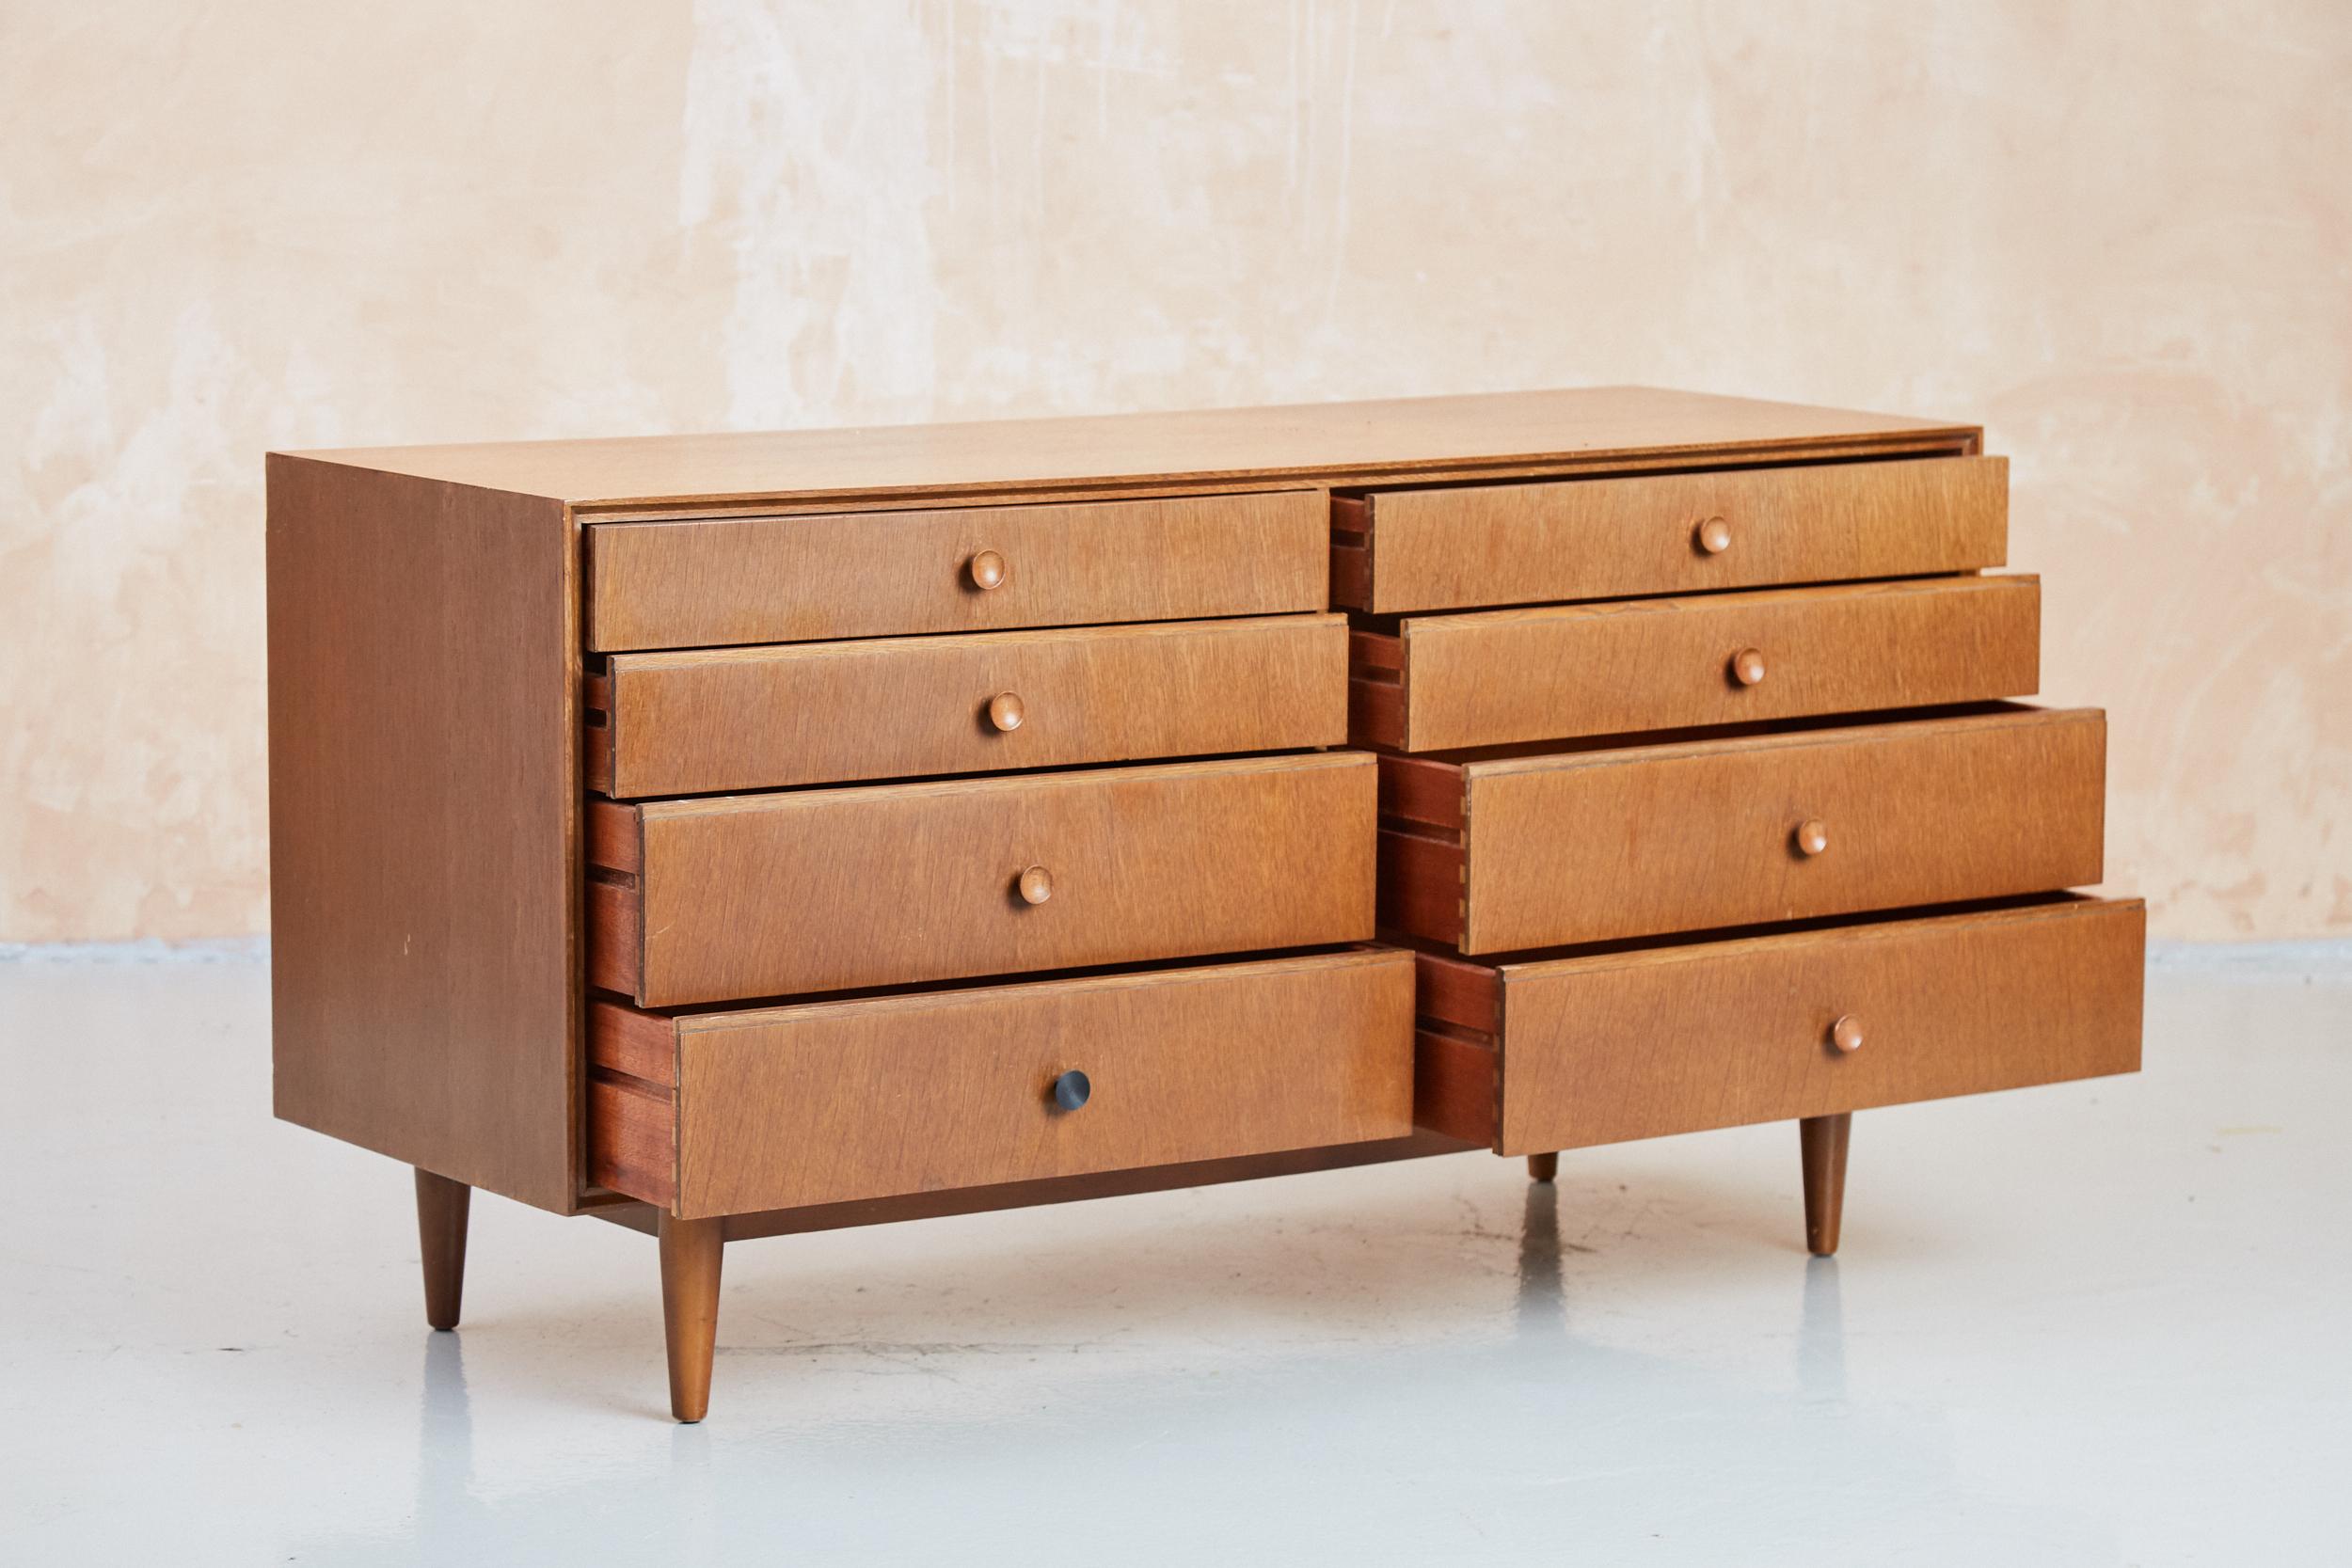 A rare vintage Meredew chest of 8 drawers, manufactured in the 1960s. Finished in dark oak, with solid oak conical handles, an iconic feature of Meredew from the mid century. The piece is a very comfortable size, between a sideboard and a chest of